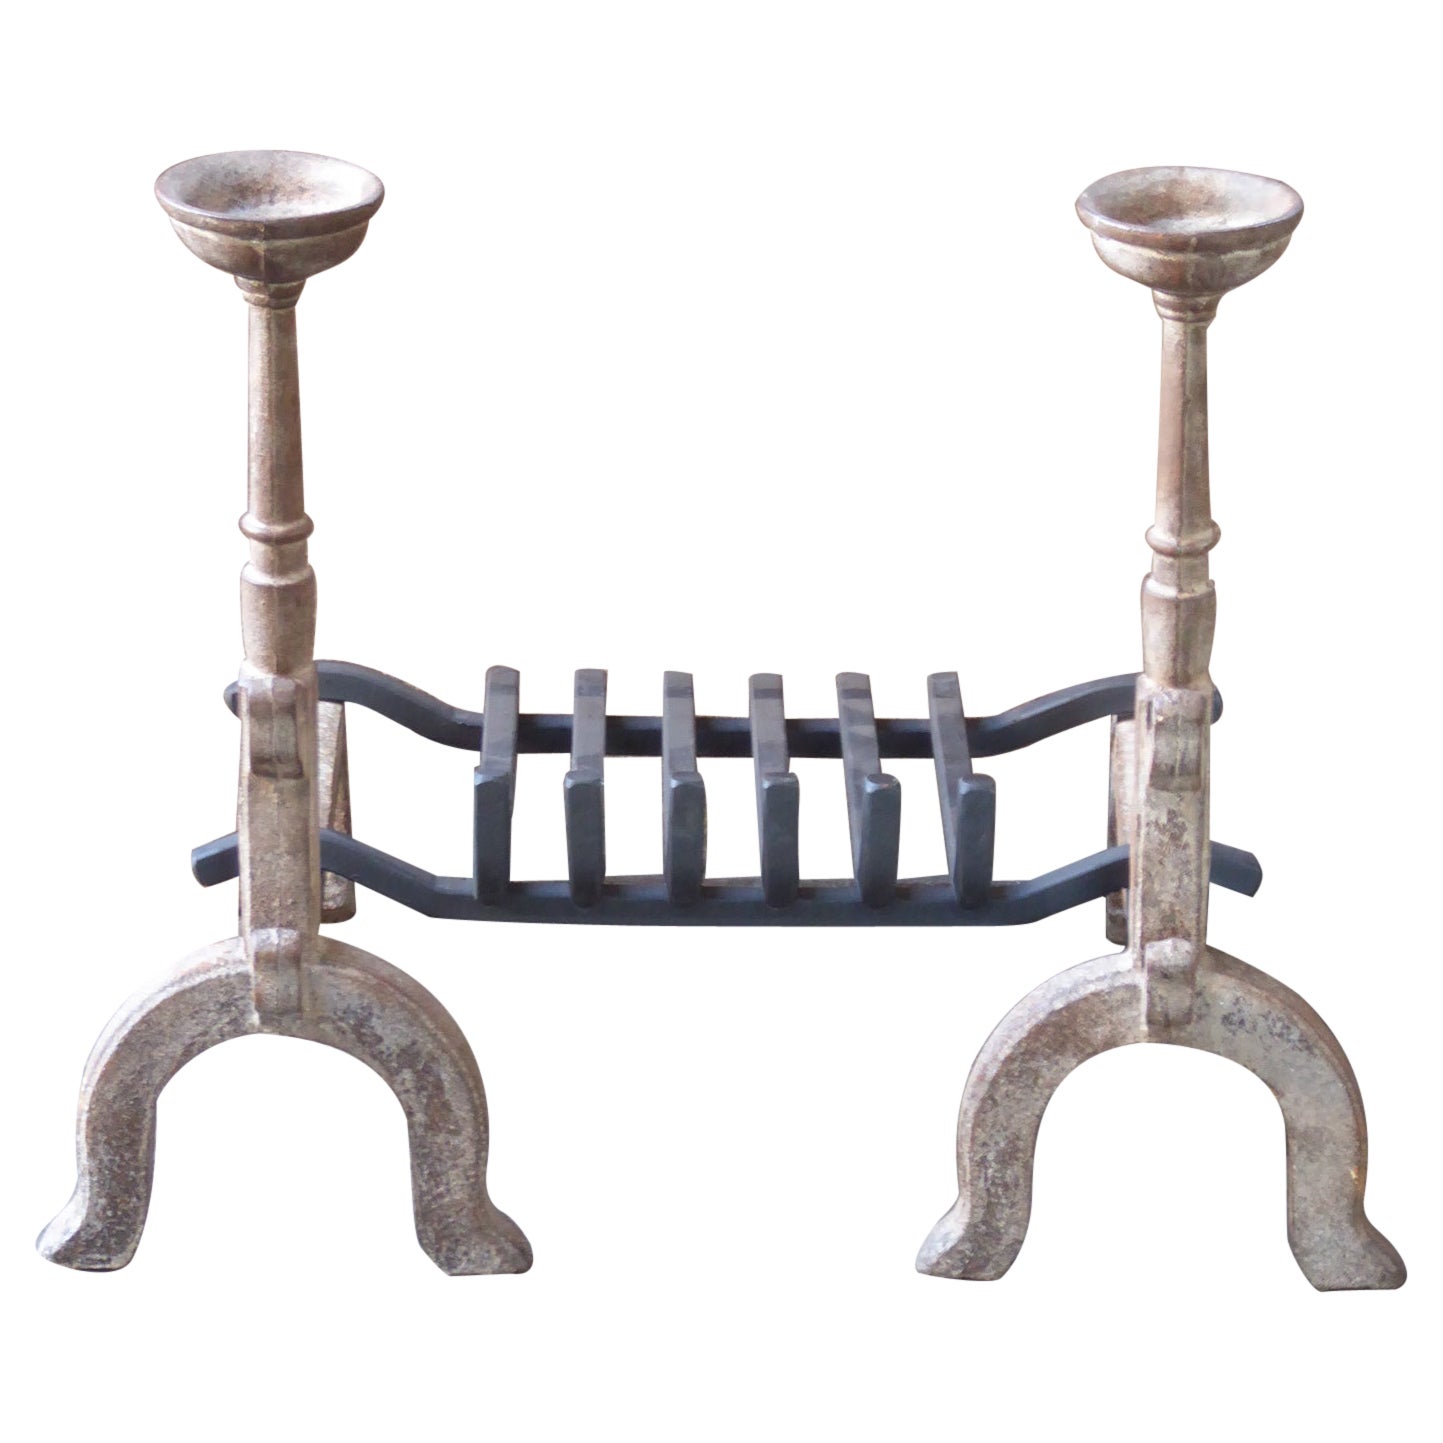 French Neogothic Fire Grate, Fireplace Grate